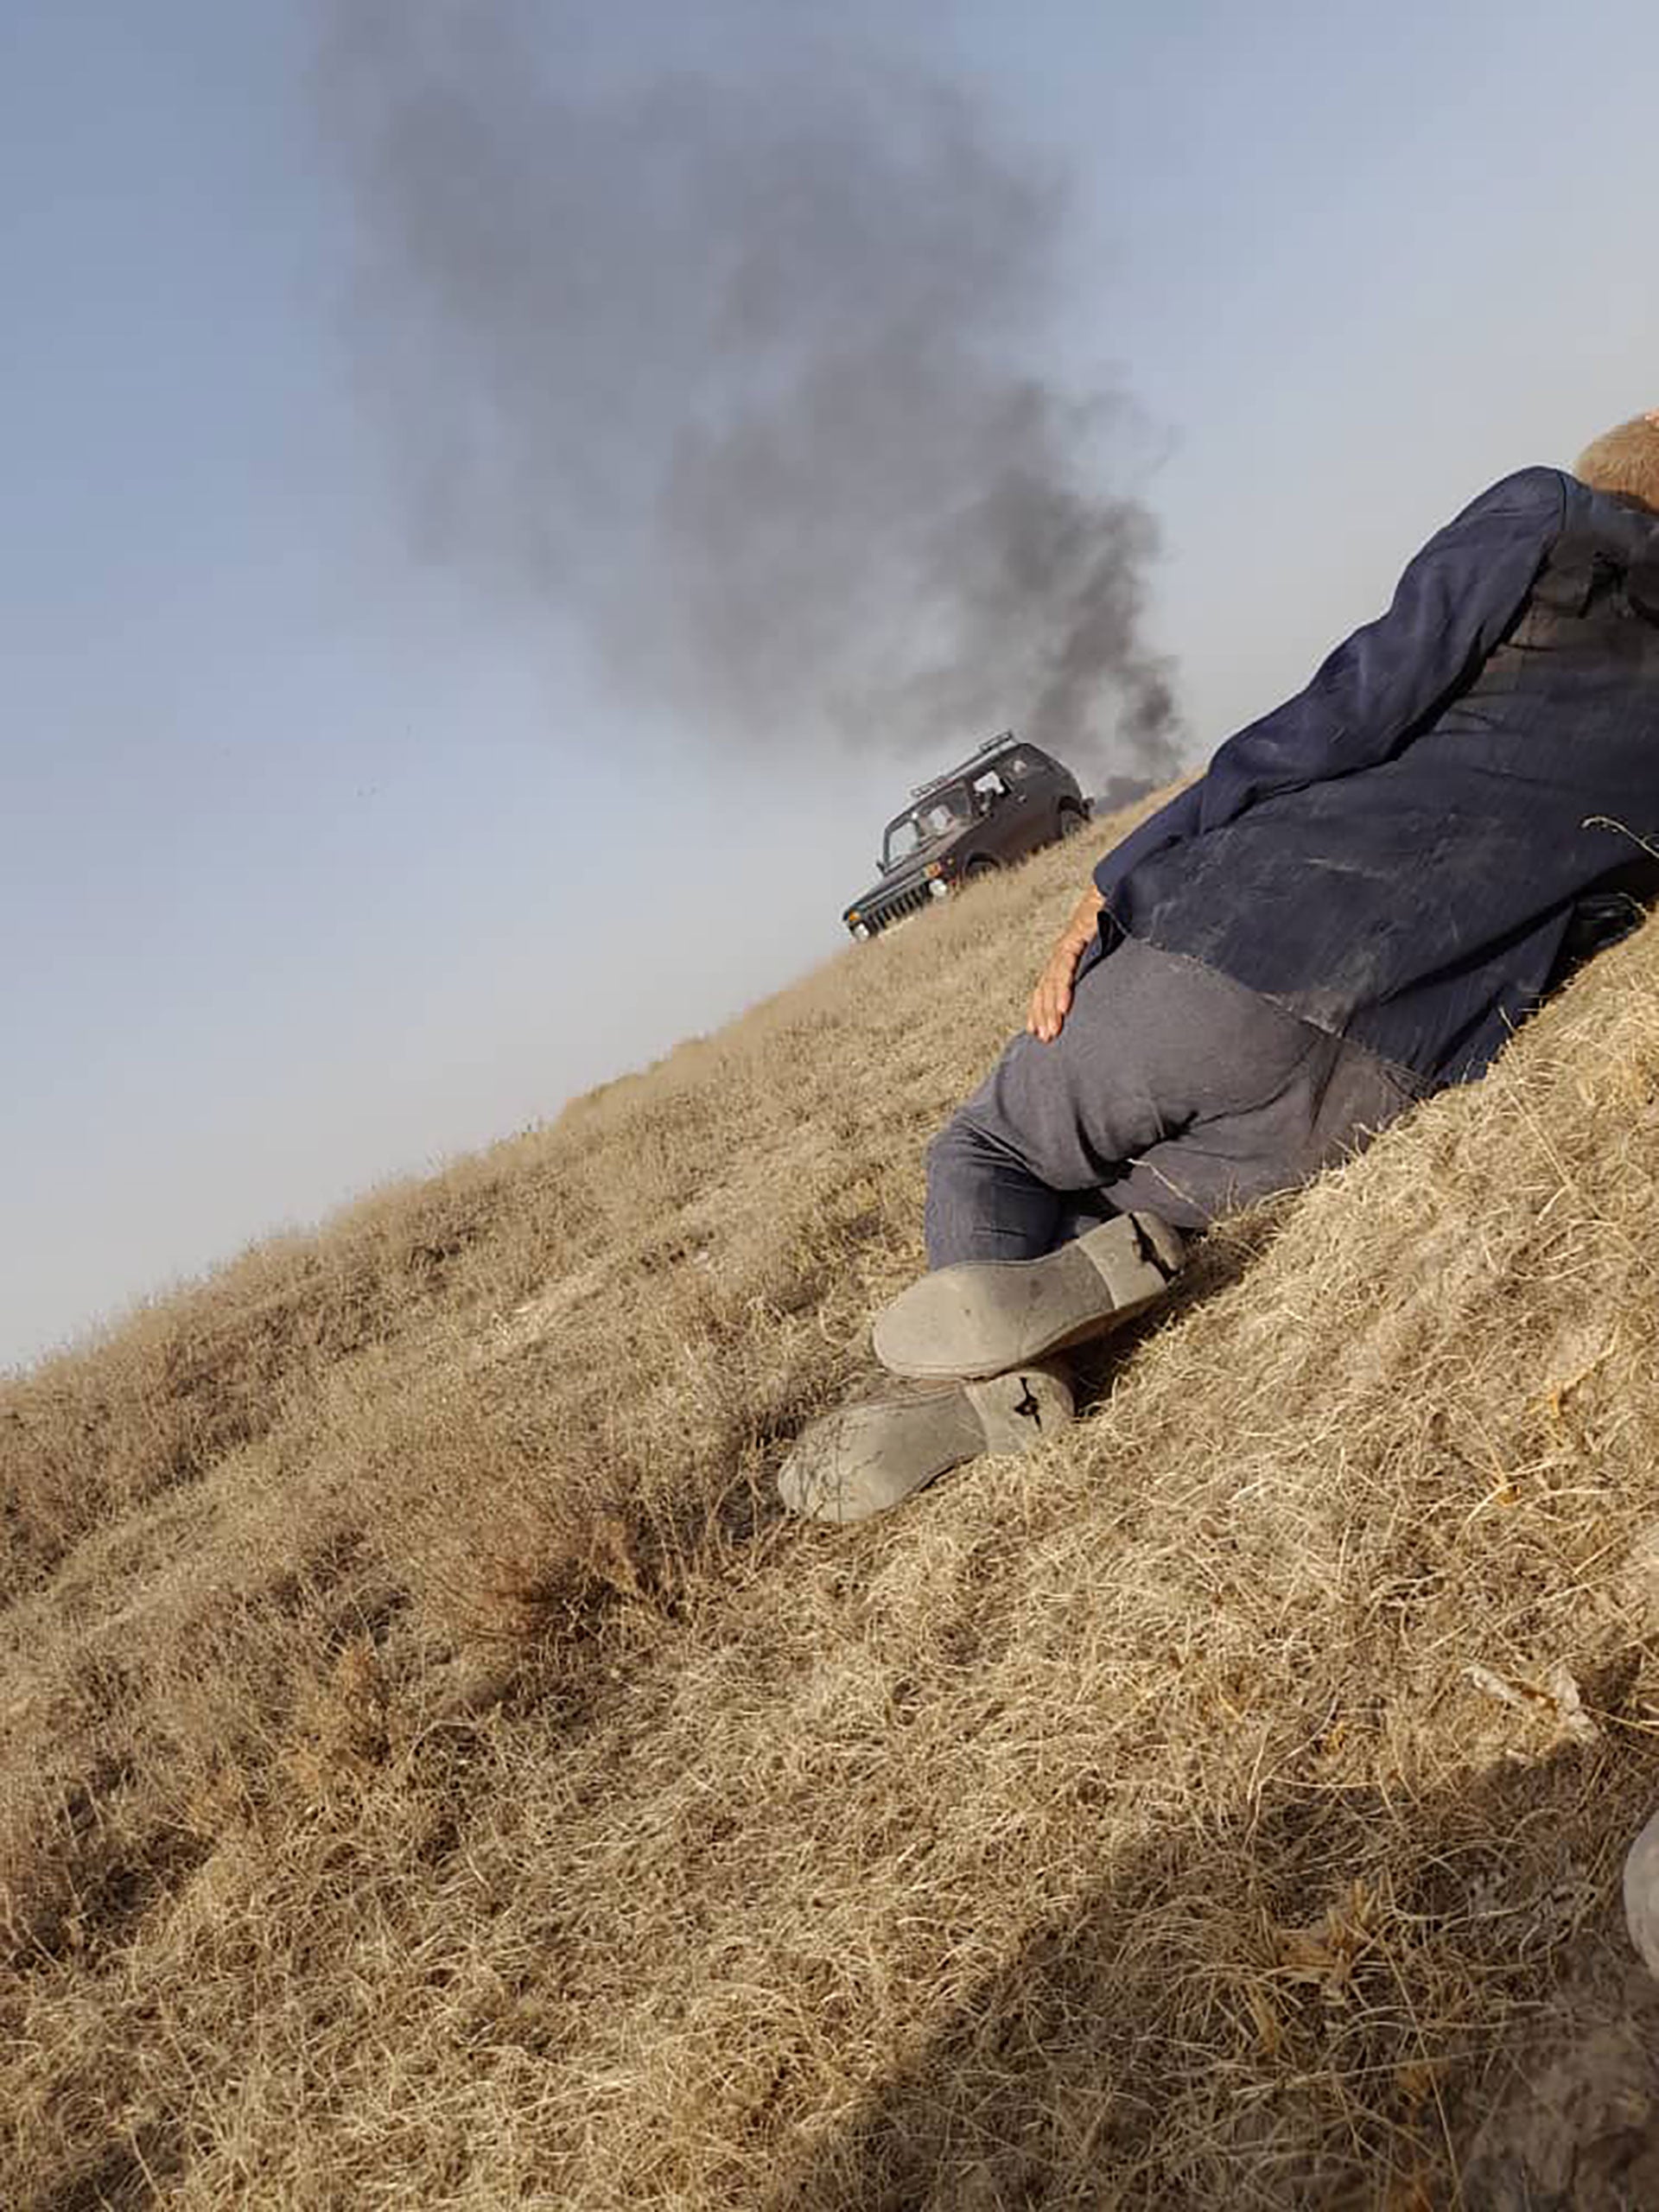 A photo taken by a member of the Kyrgyz Sulaimanov family, as they hid by the roadside when Tajik forces attacked their vehicle near the Kyrgyz village of Maksat, on September 16, 2022.